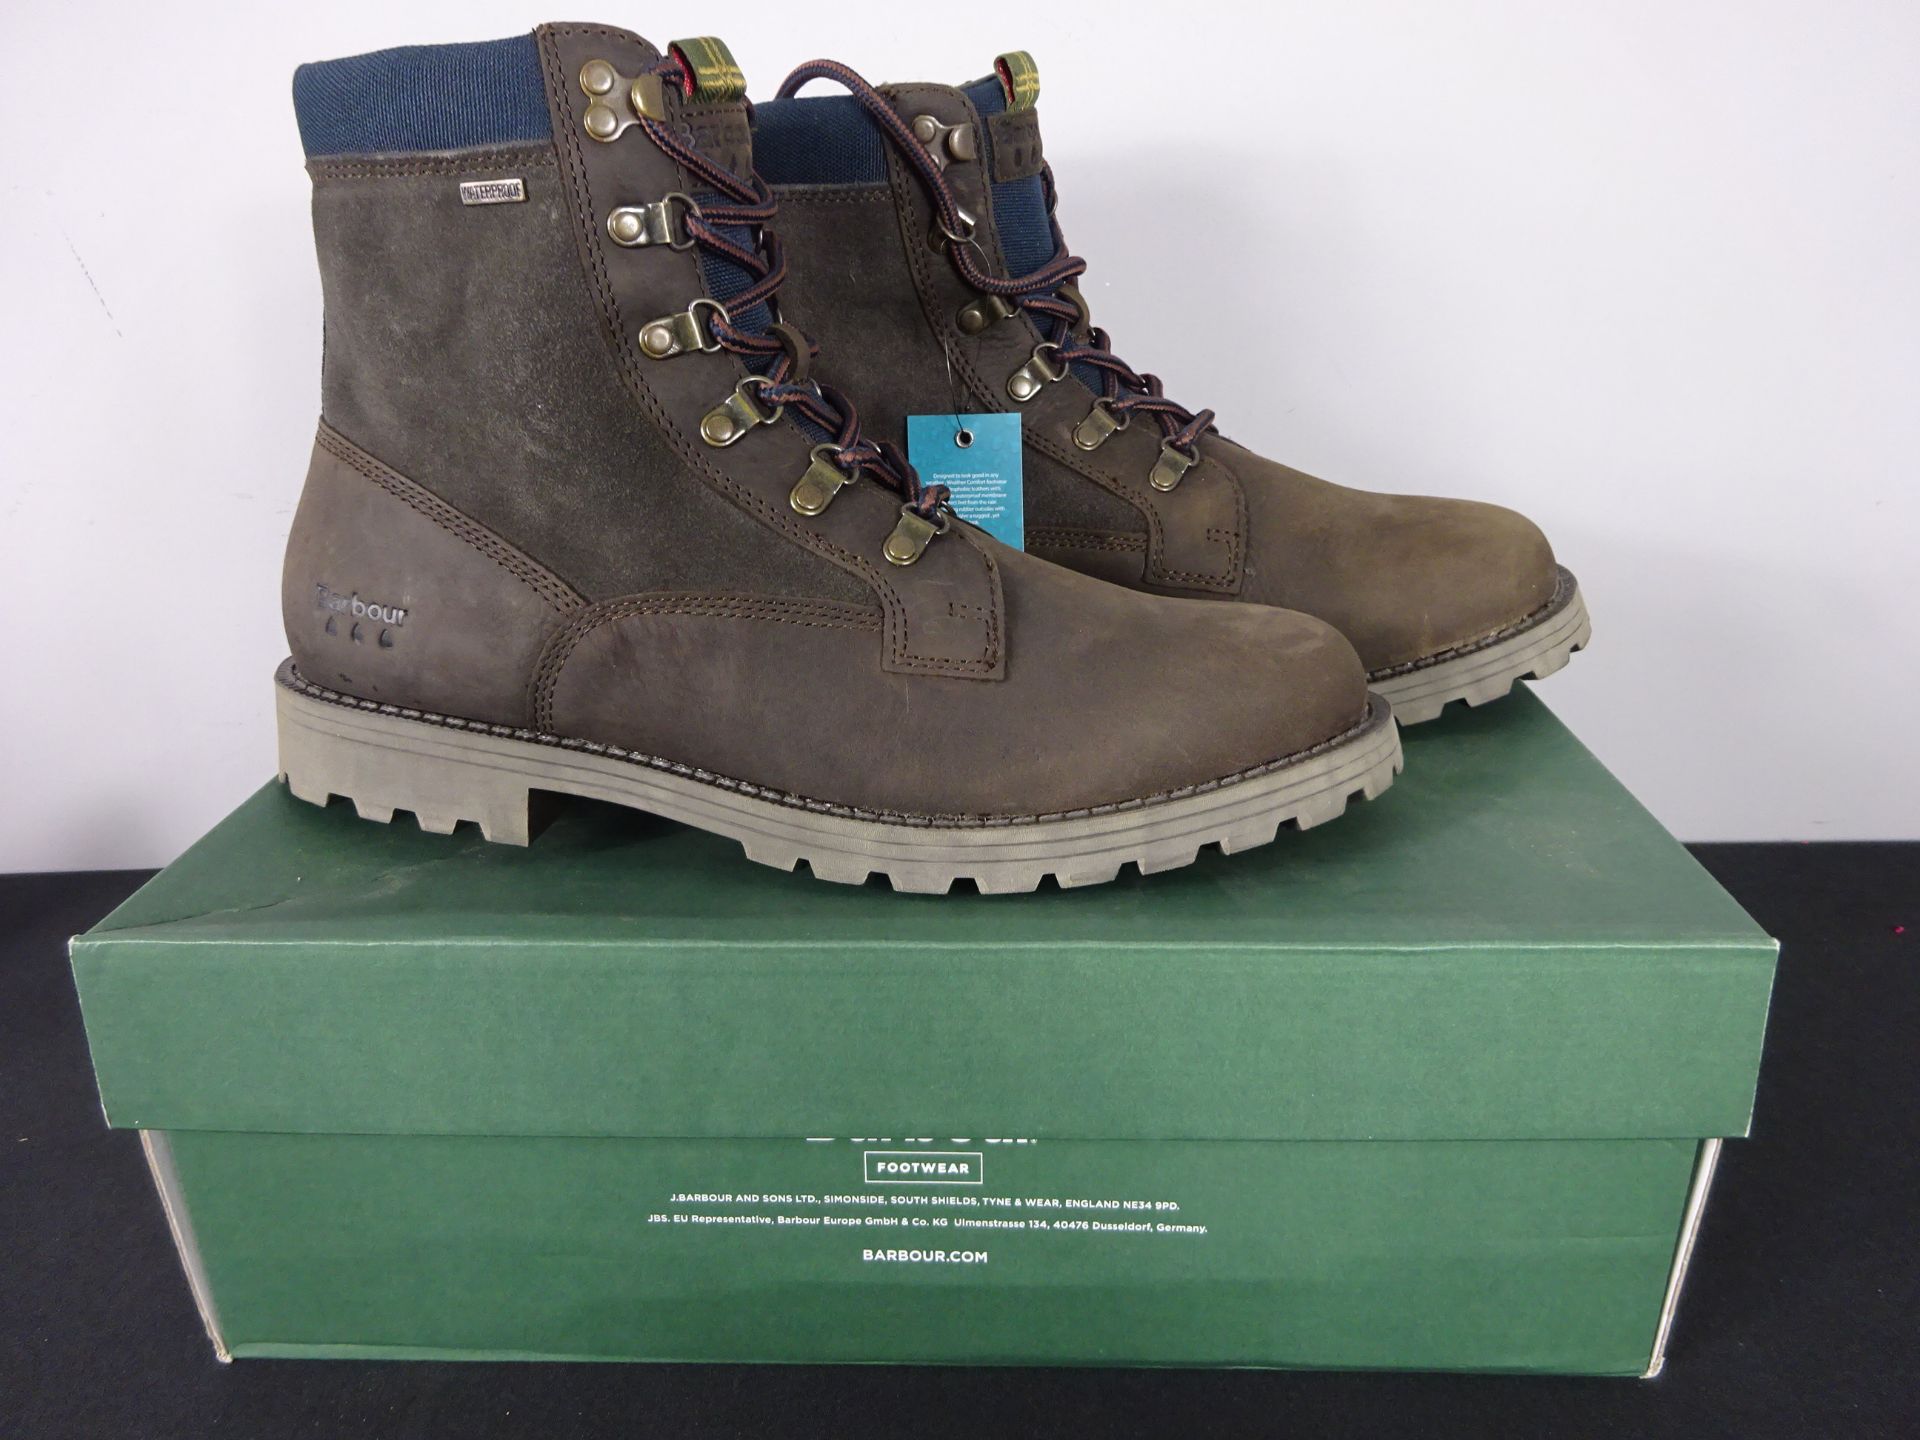 RRP £129.99 - New Barbour Chiltern Boots - Size 12.